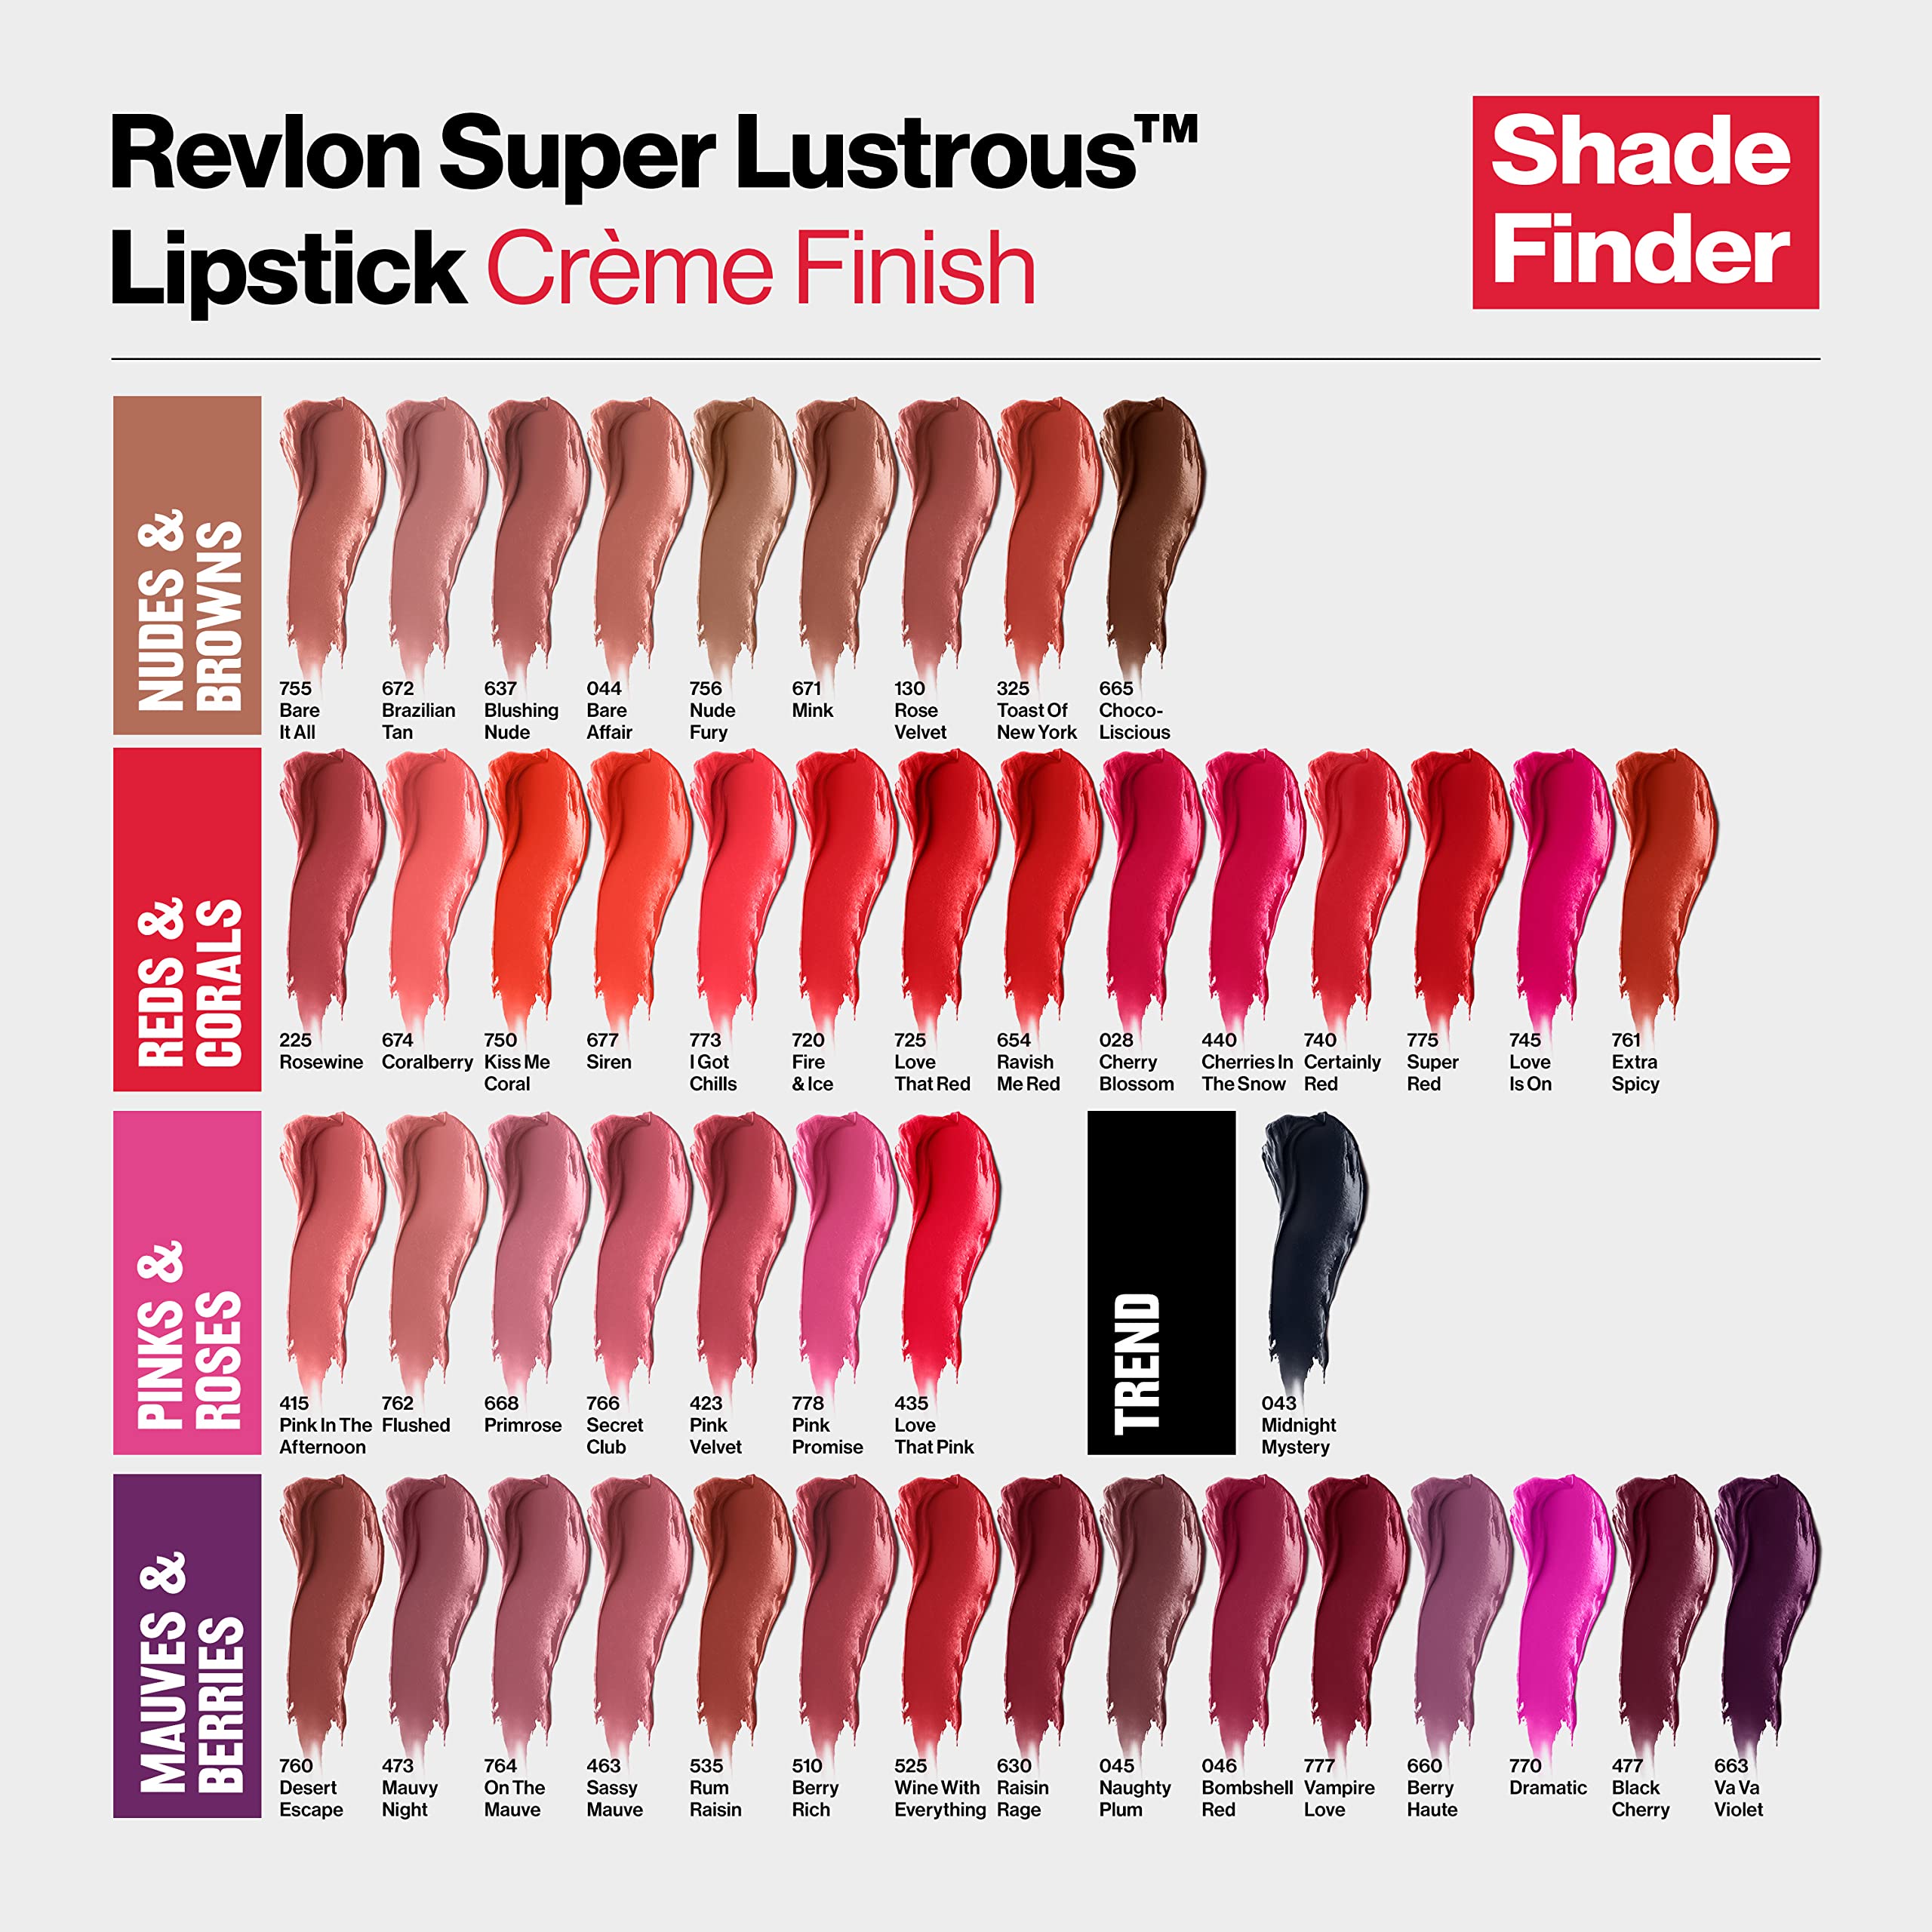 Revlon Super Lustrous Lipstick, High Impact Lipcolor with Moisturizing Creamy Formula, Infused with Vitamin E and Avocado Oil in Reds & Corals, Kiss Me Coral (750) 0.15 oz